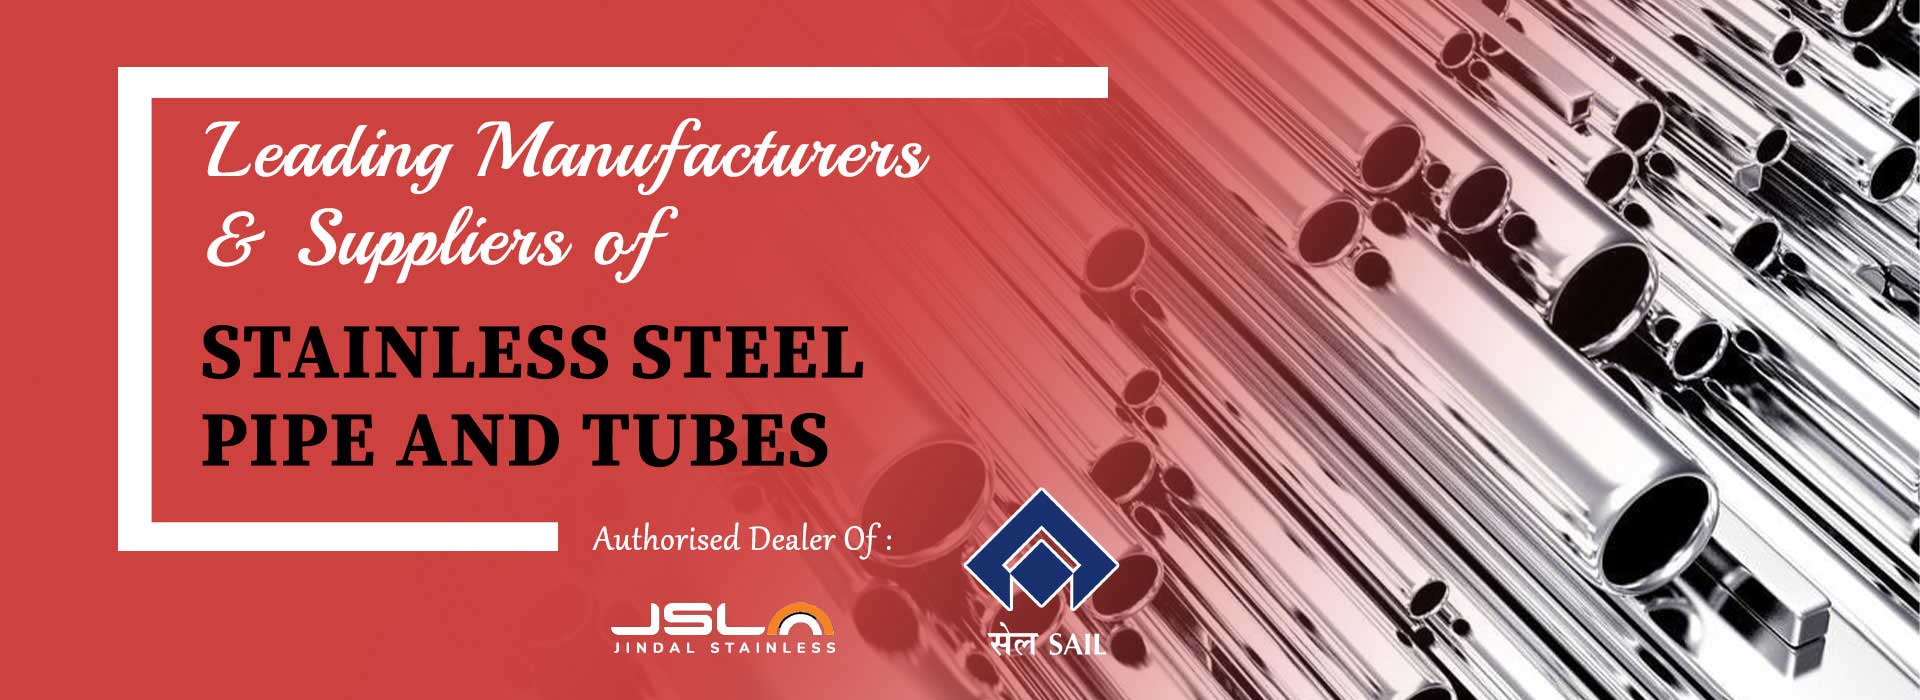 Stainless Steel Pipe and Tubes Manufacturers in Jalandhar